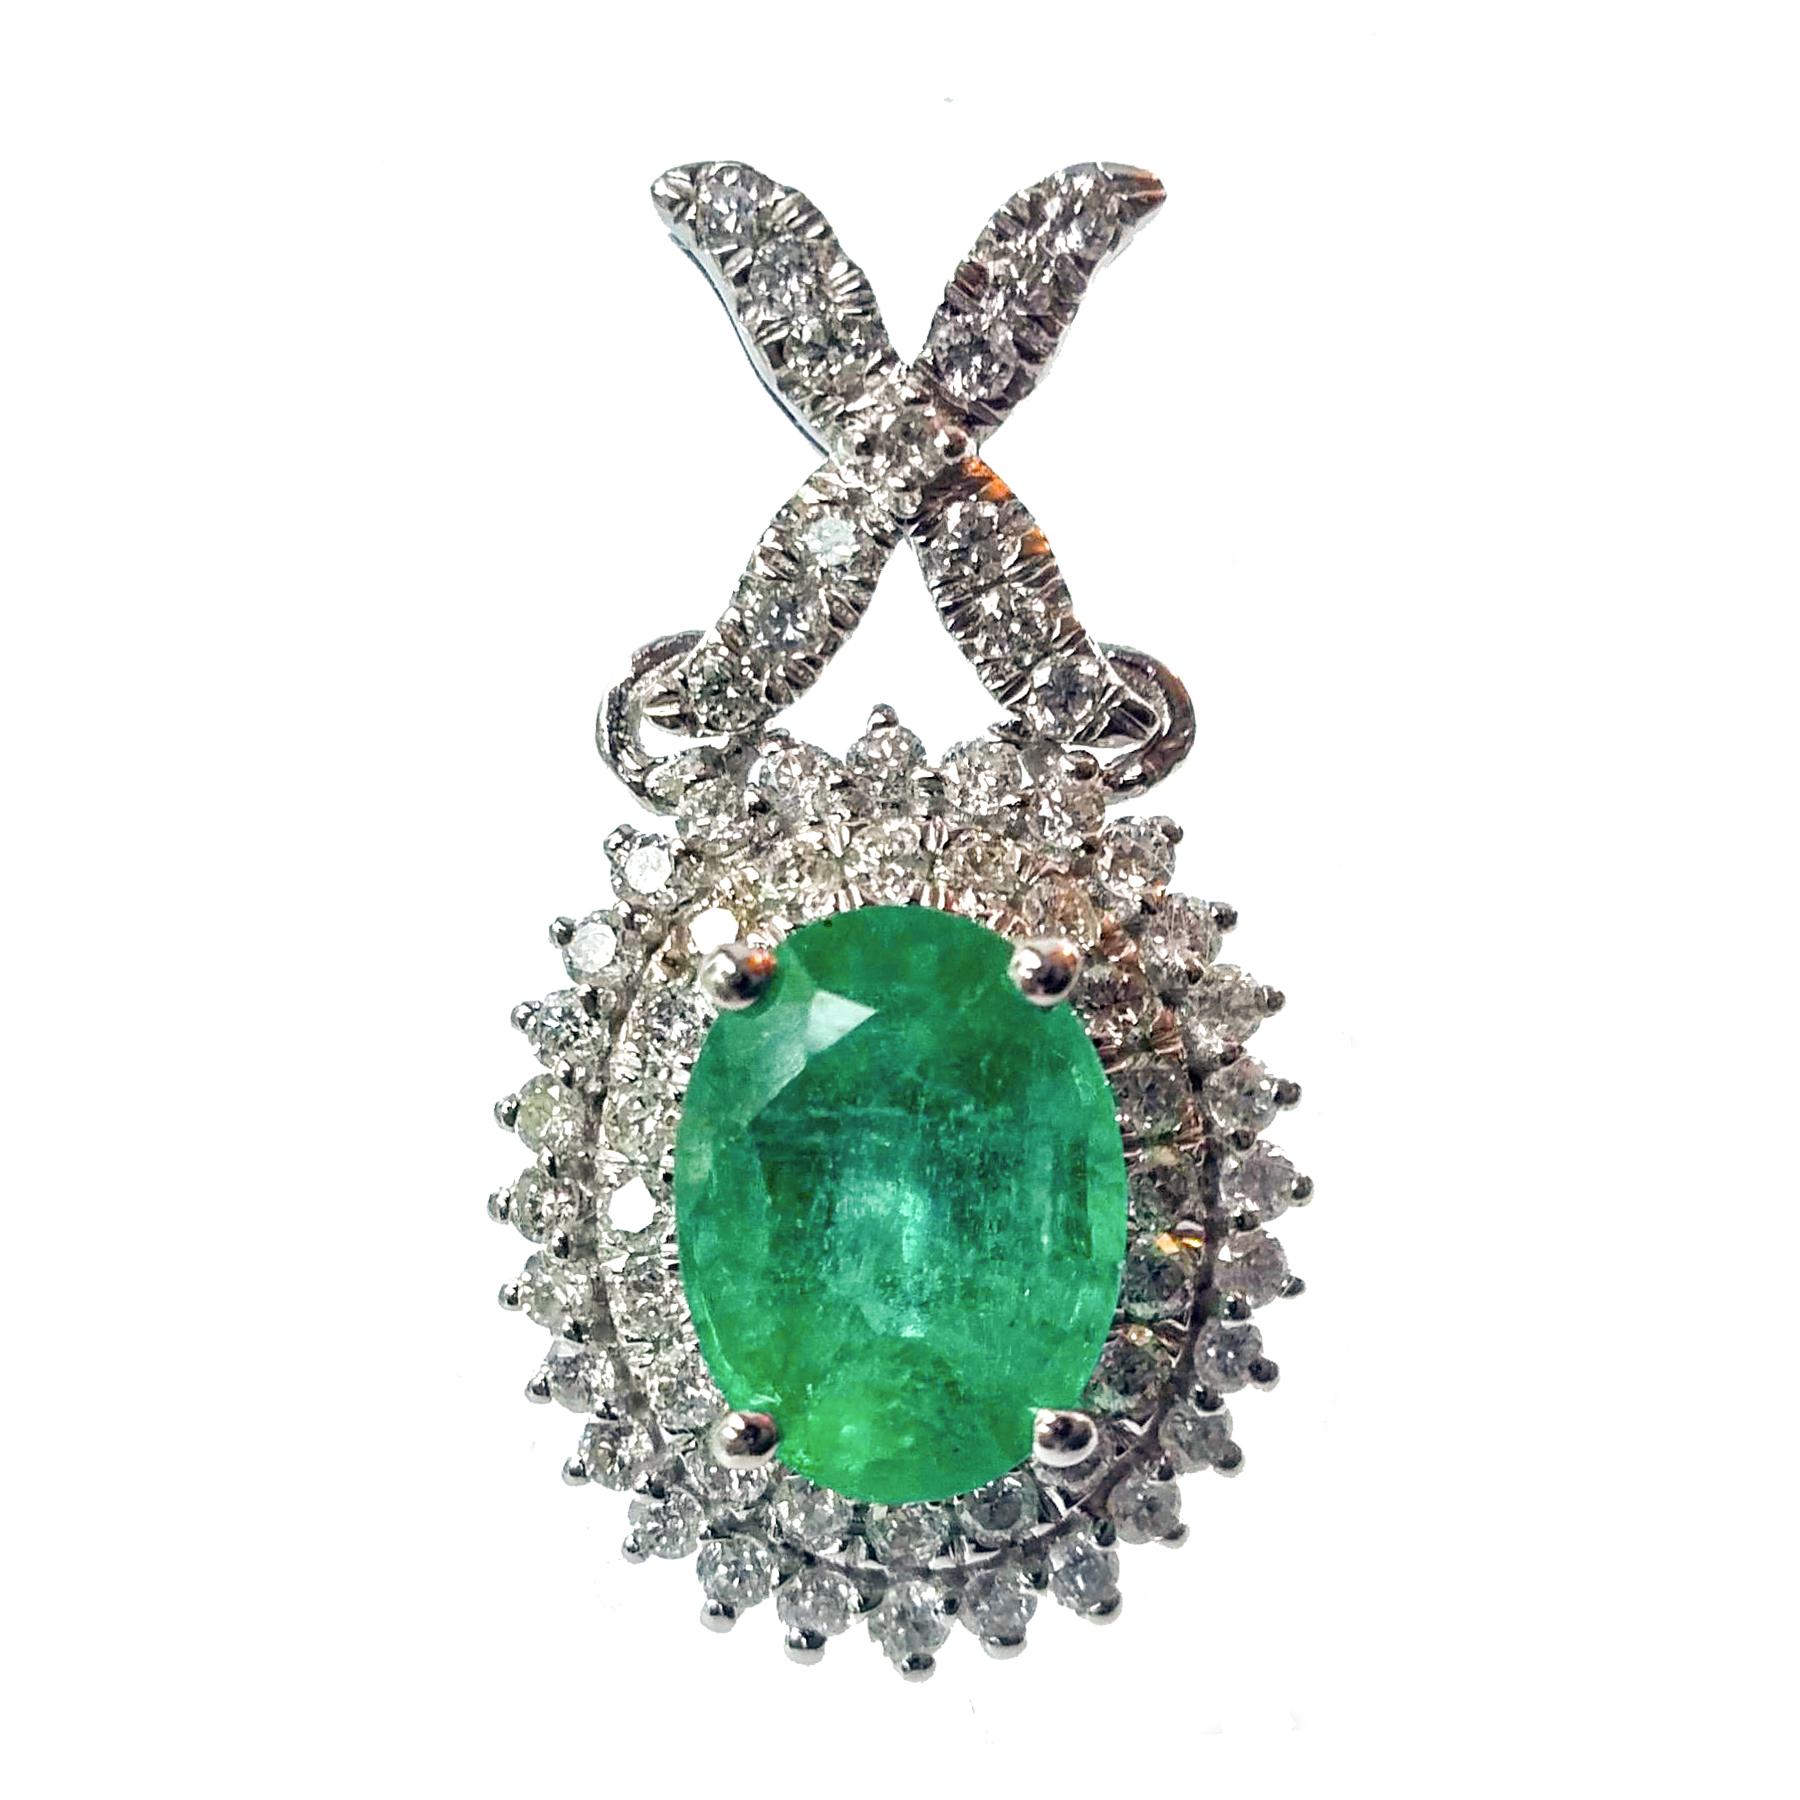 Majestic emerald and diamond necklace earring set. Lively,14.73 carats, high luster, intense bluish-green pear and oval faceted natural emeralds, encased in basket mounting, with bead prongs, surrounded with round brilliant cut diamond. Contemporary